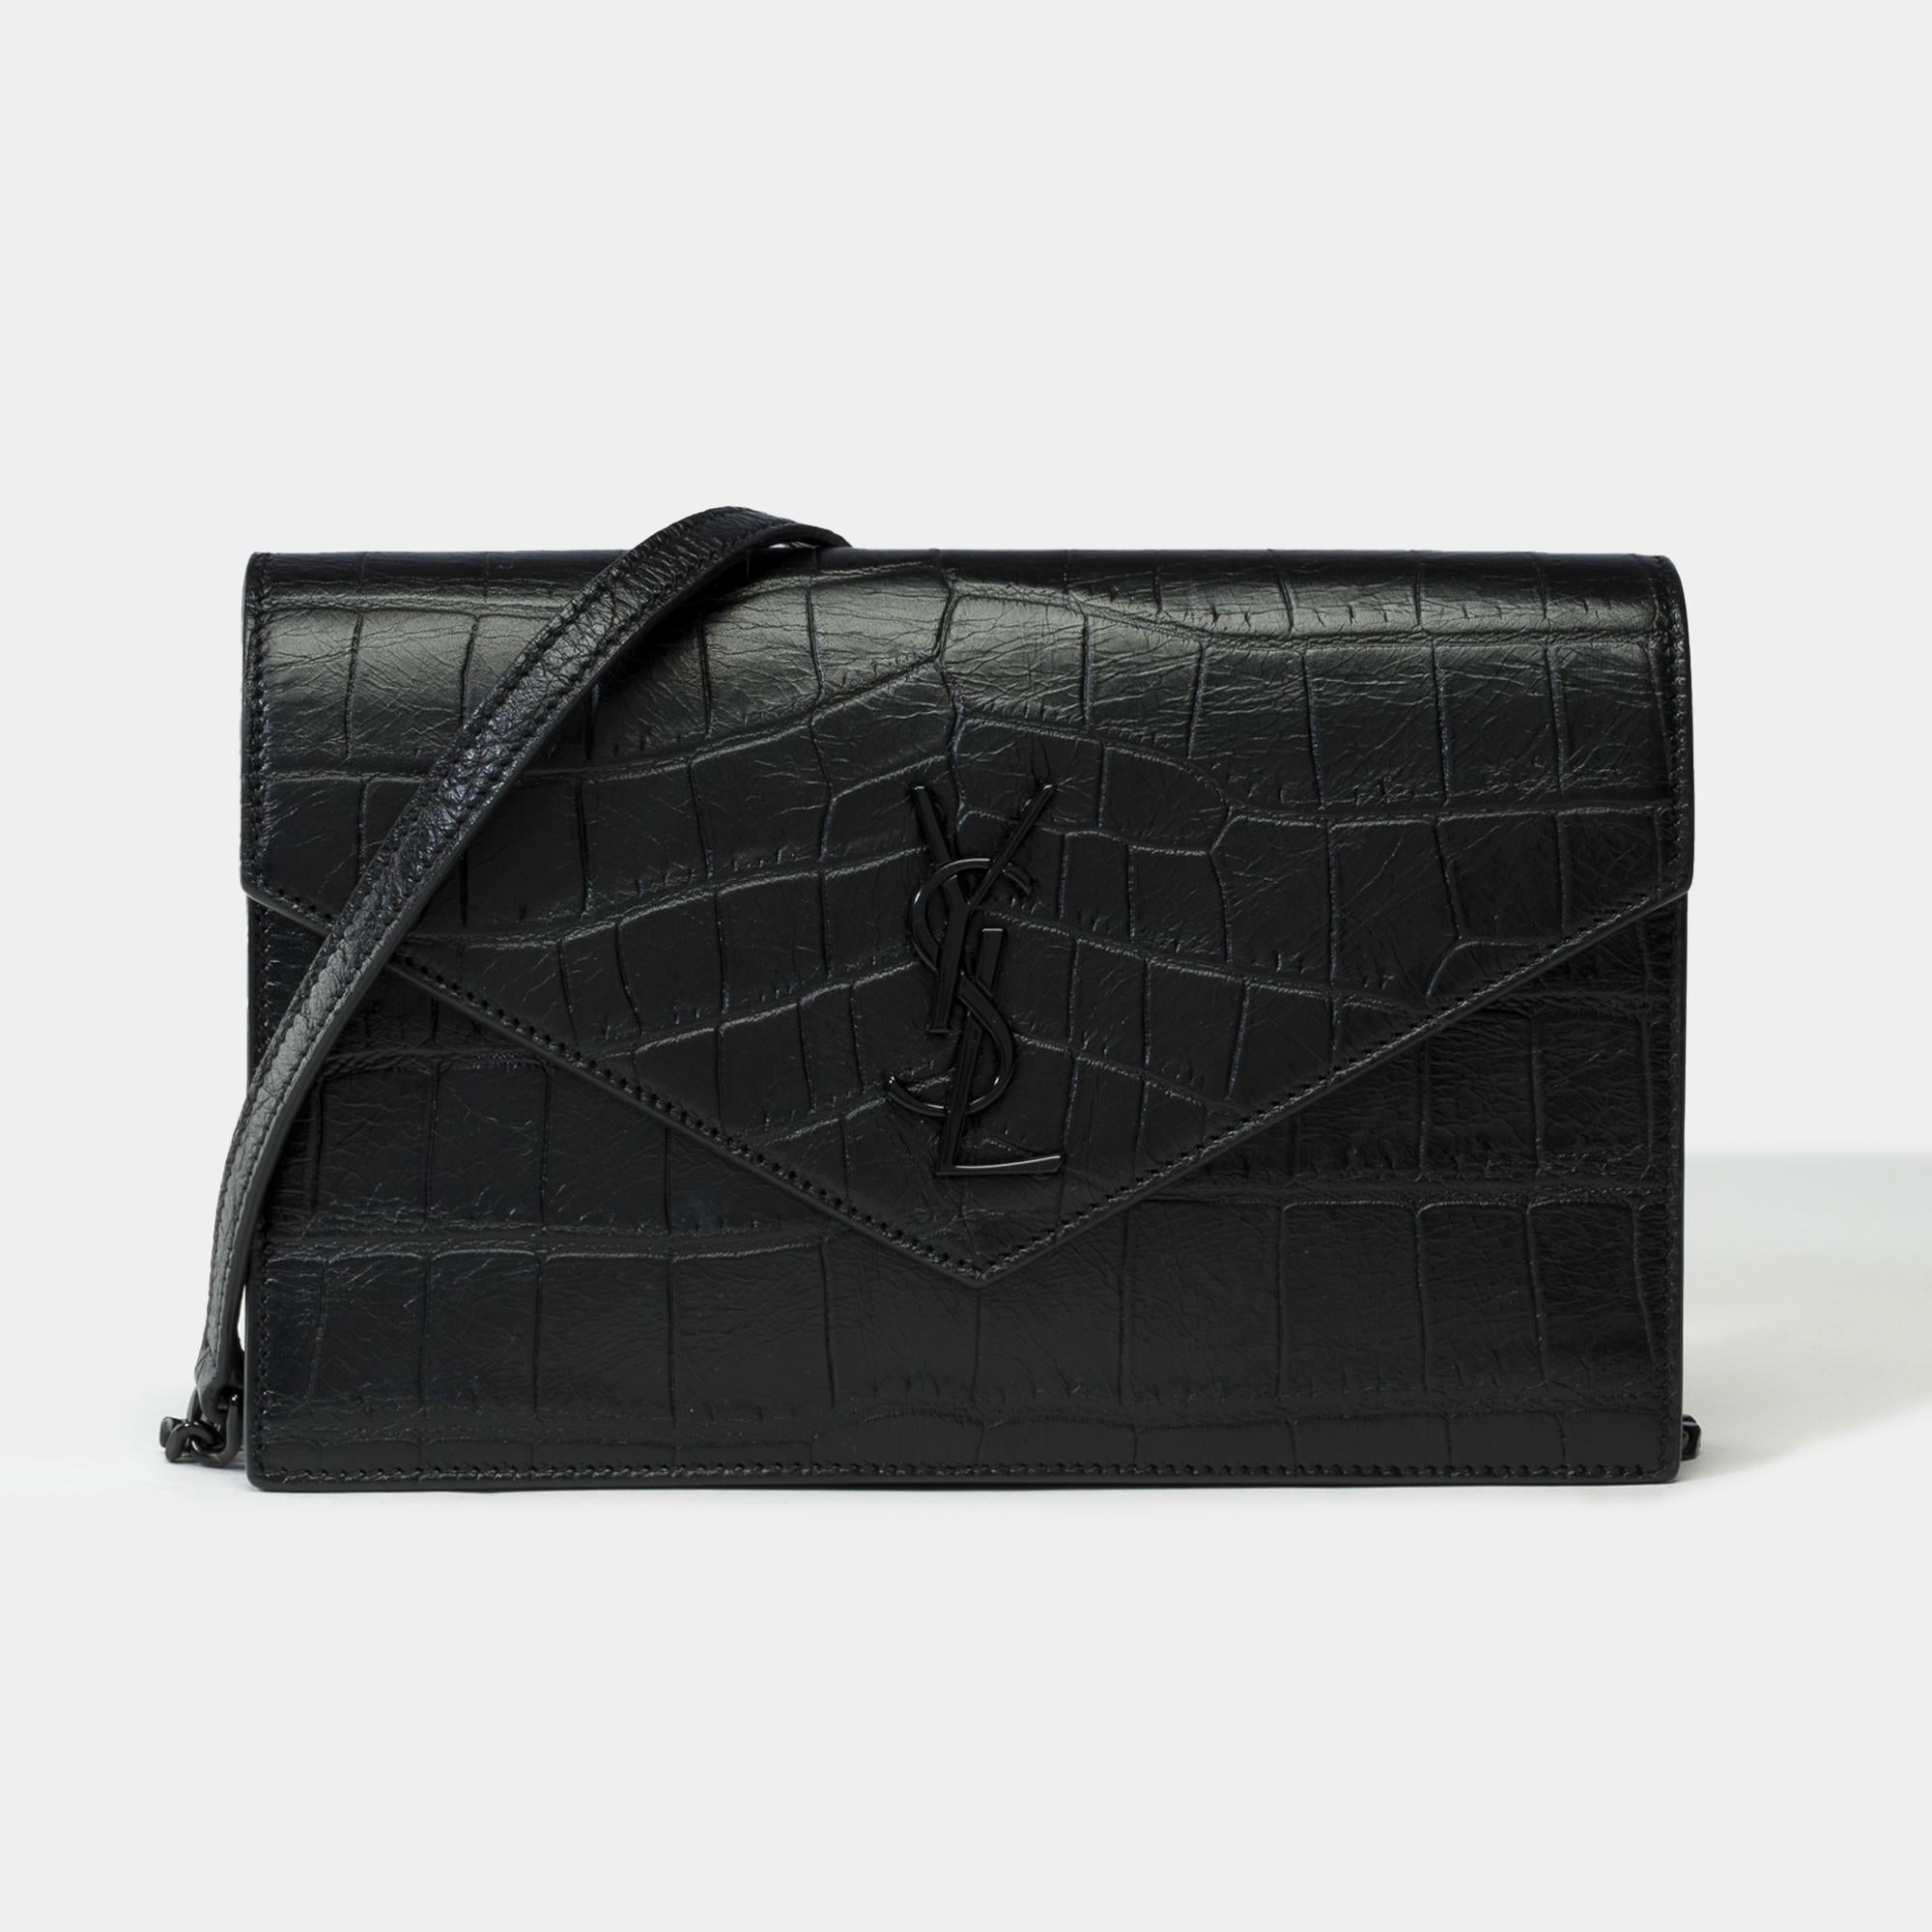 Stunning​ ​YSL​ ​​ ​Wallet​ ​On​ ​Chain​ ​(WOC)​ ​Enveloppe​ ​in​ ​black​ ​leather​ ​printed​ ​crocodile​ ​chain​ ​decorated​ ​with​ ​black​ ​Cassandra,​ ​black​ ​metal​ ​trim​ ​allowing​ ​a​ ​shoulder​ ​or​ ​crossbody carry

Snap​ ​closure
Black​